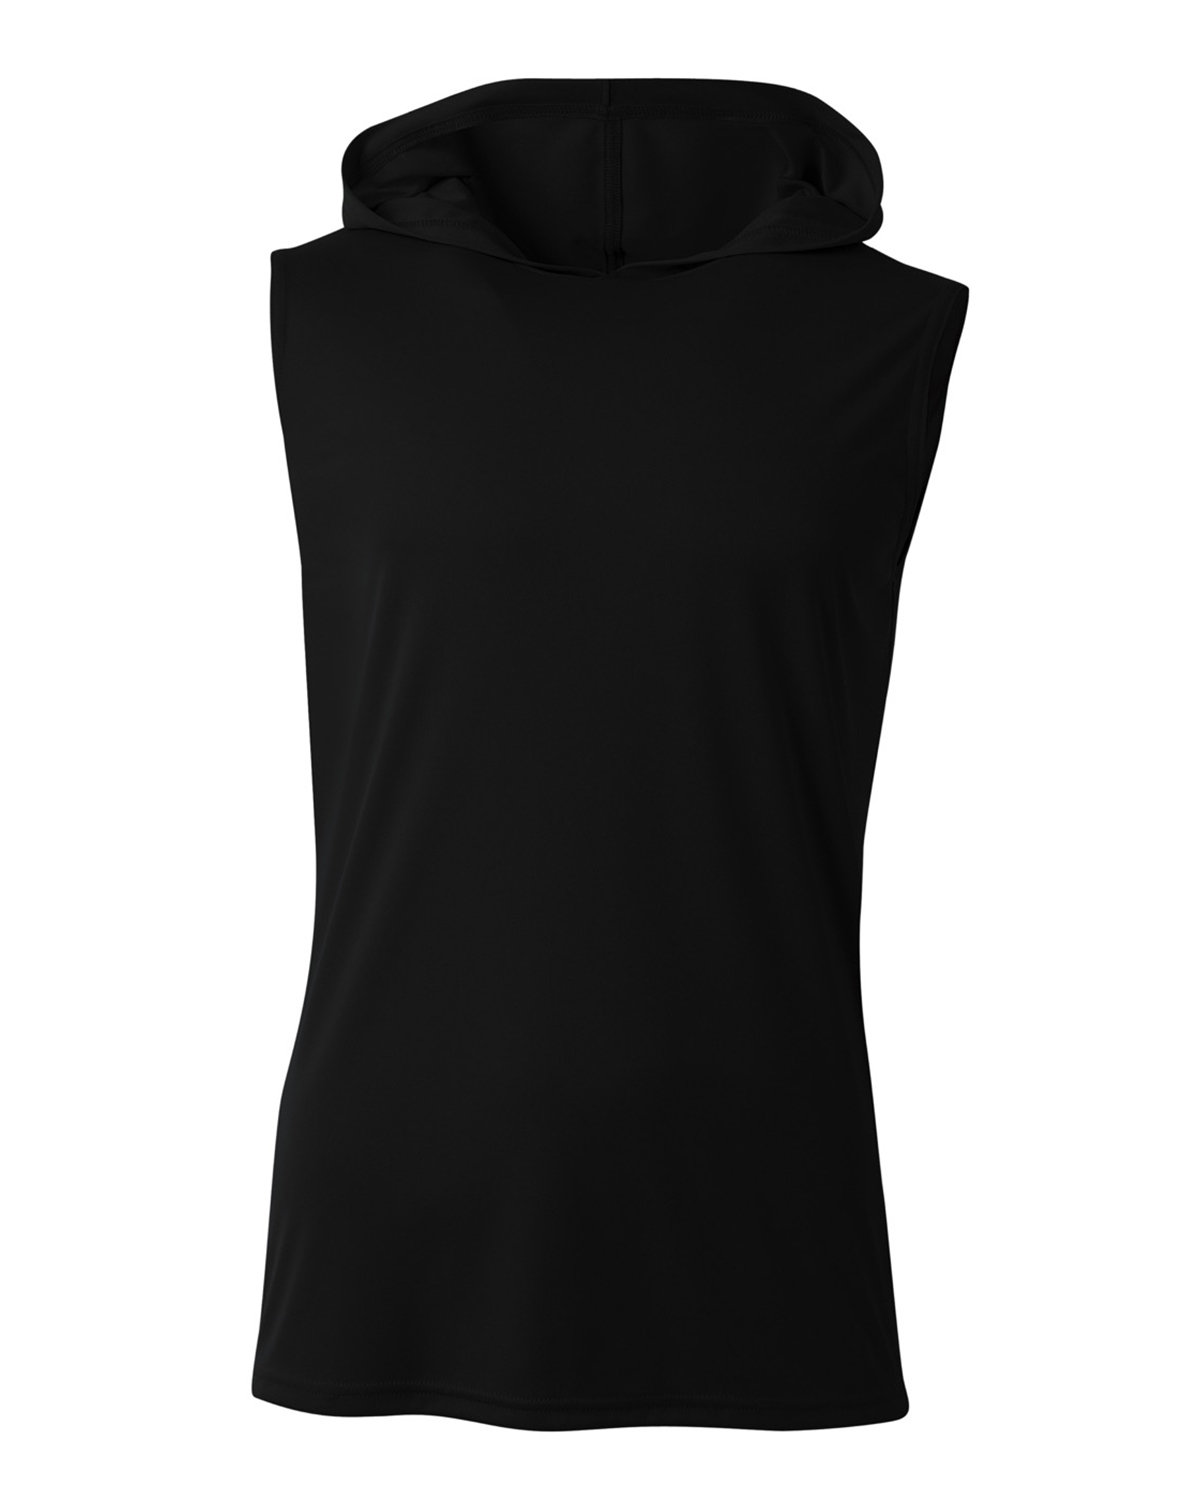 Momma Sleeveless Compression Hoodie